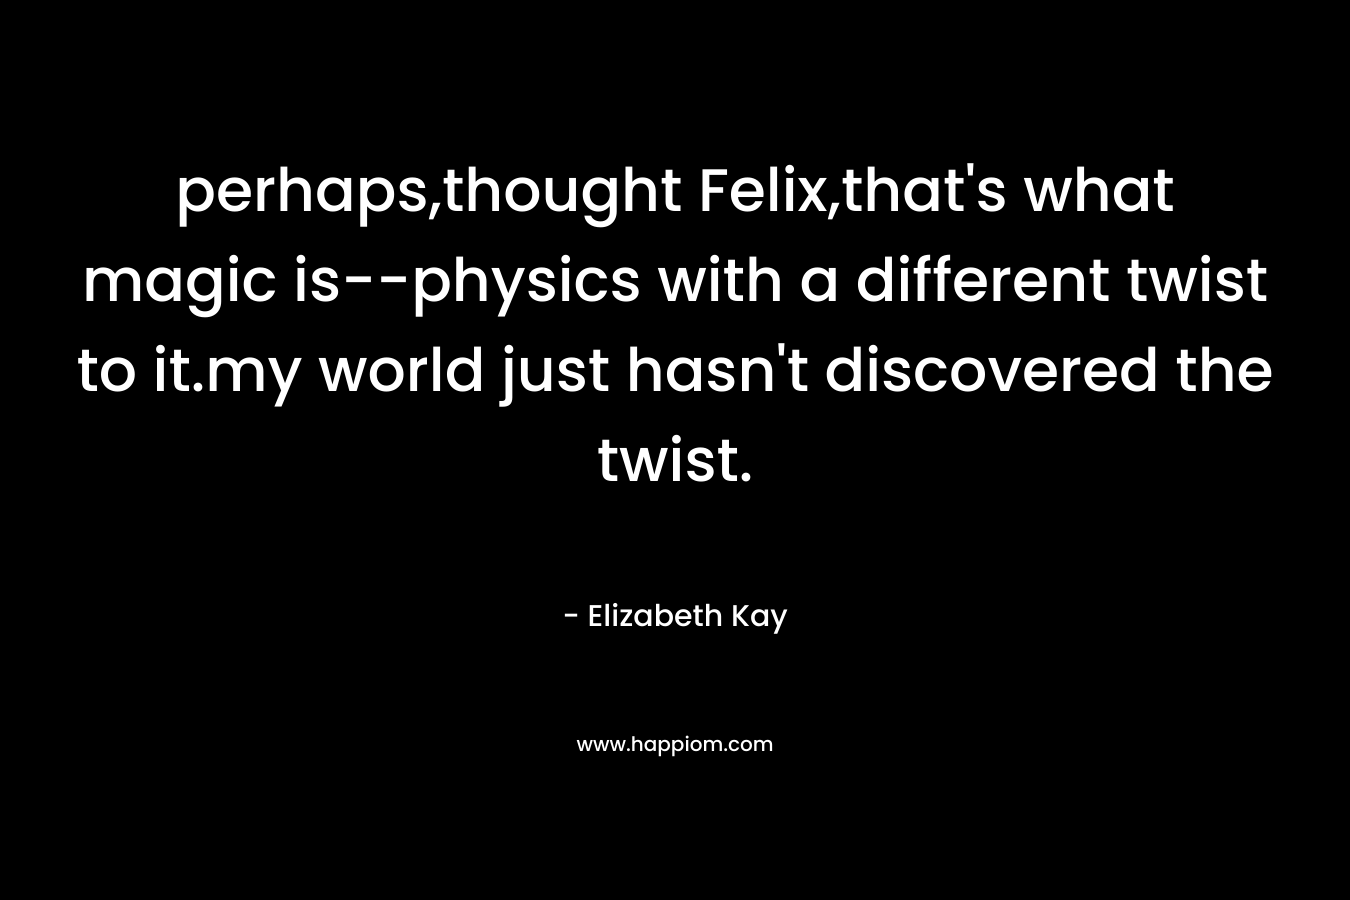 perhaps,thought Felix,that's what magic is--physics with a different twist to it.my world just hasn't discovered the twist.